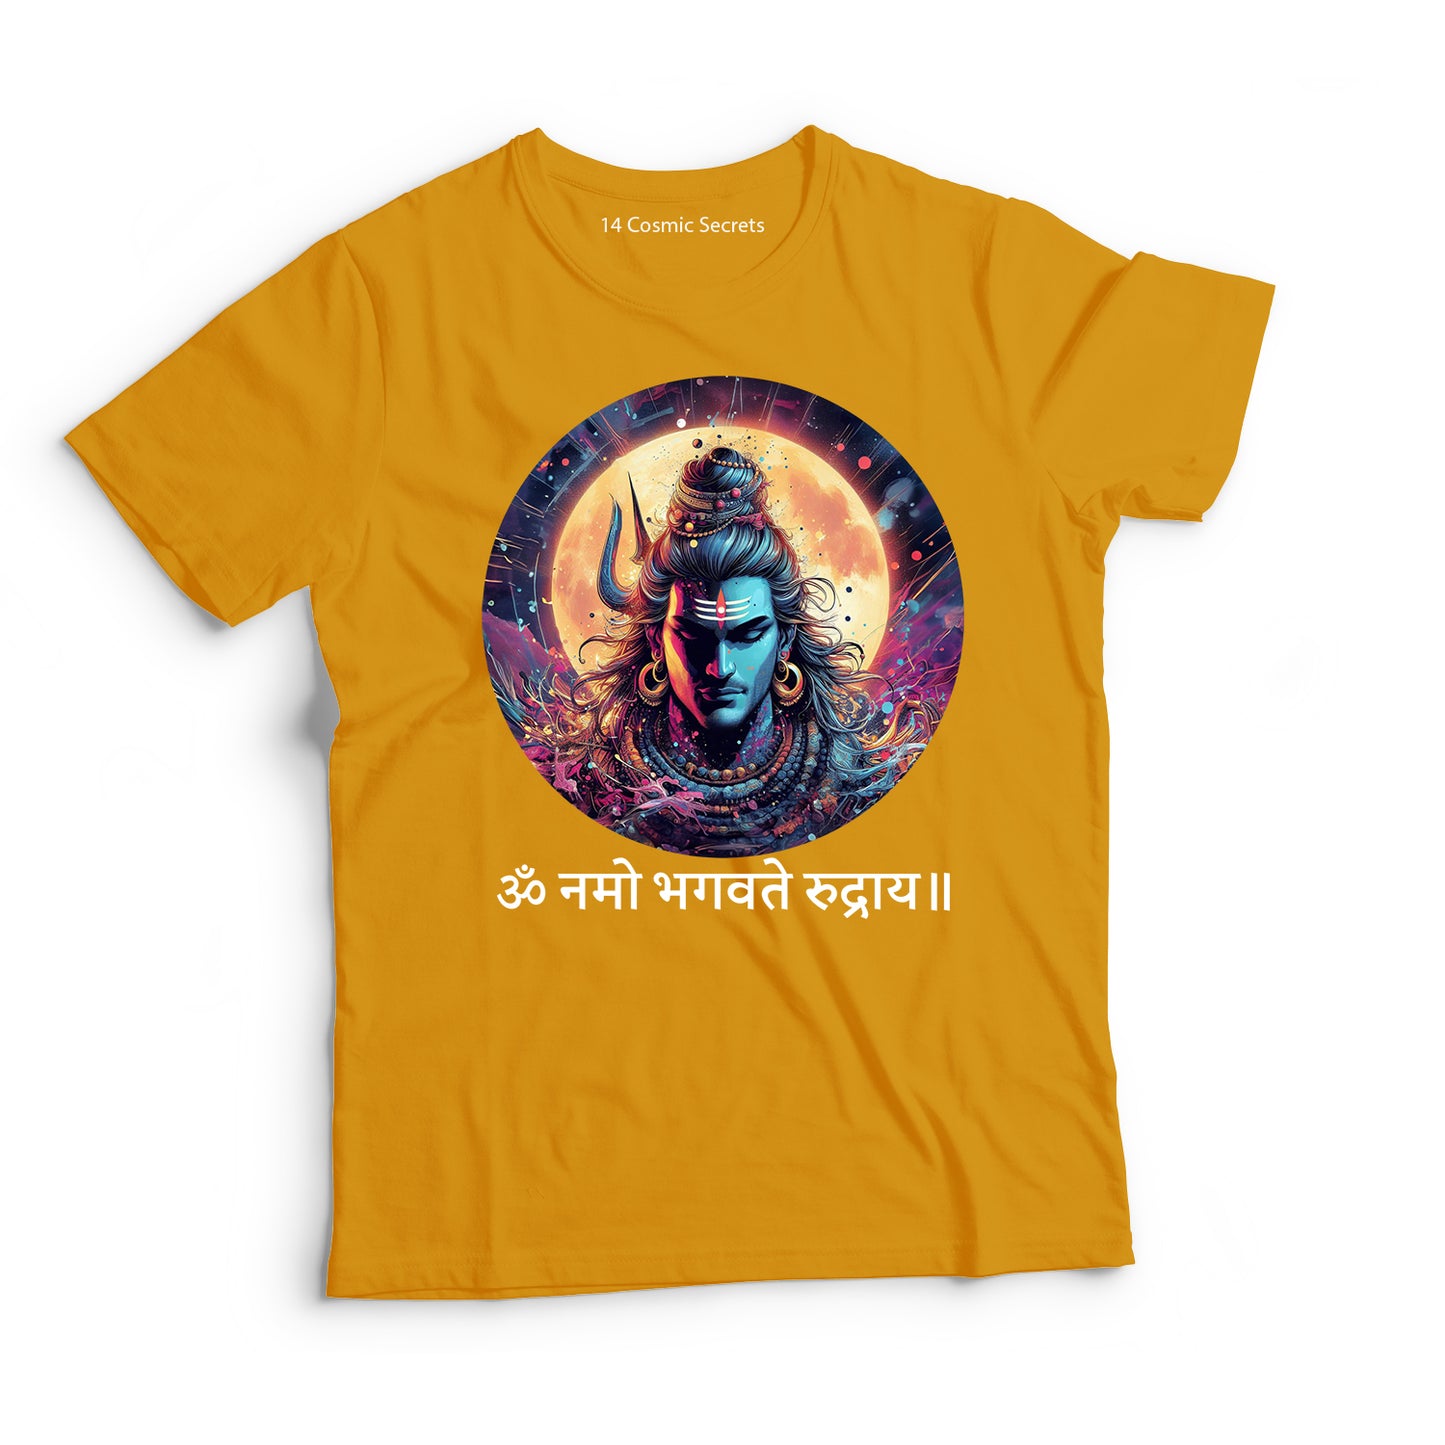 Shiva, The Transformer Tee Graphic Printed T-Shirt for Men Cotton T-Shirt Trinity Collection T-Shirt  🔱🔱🔱